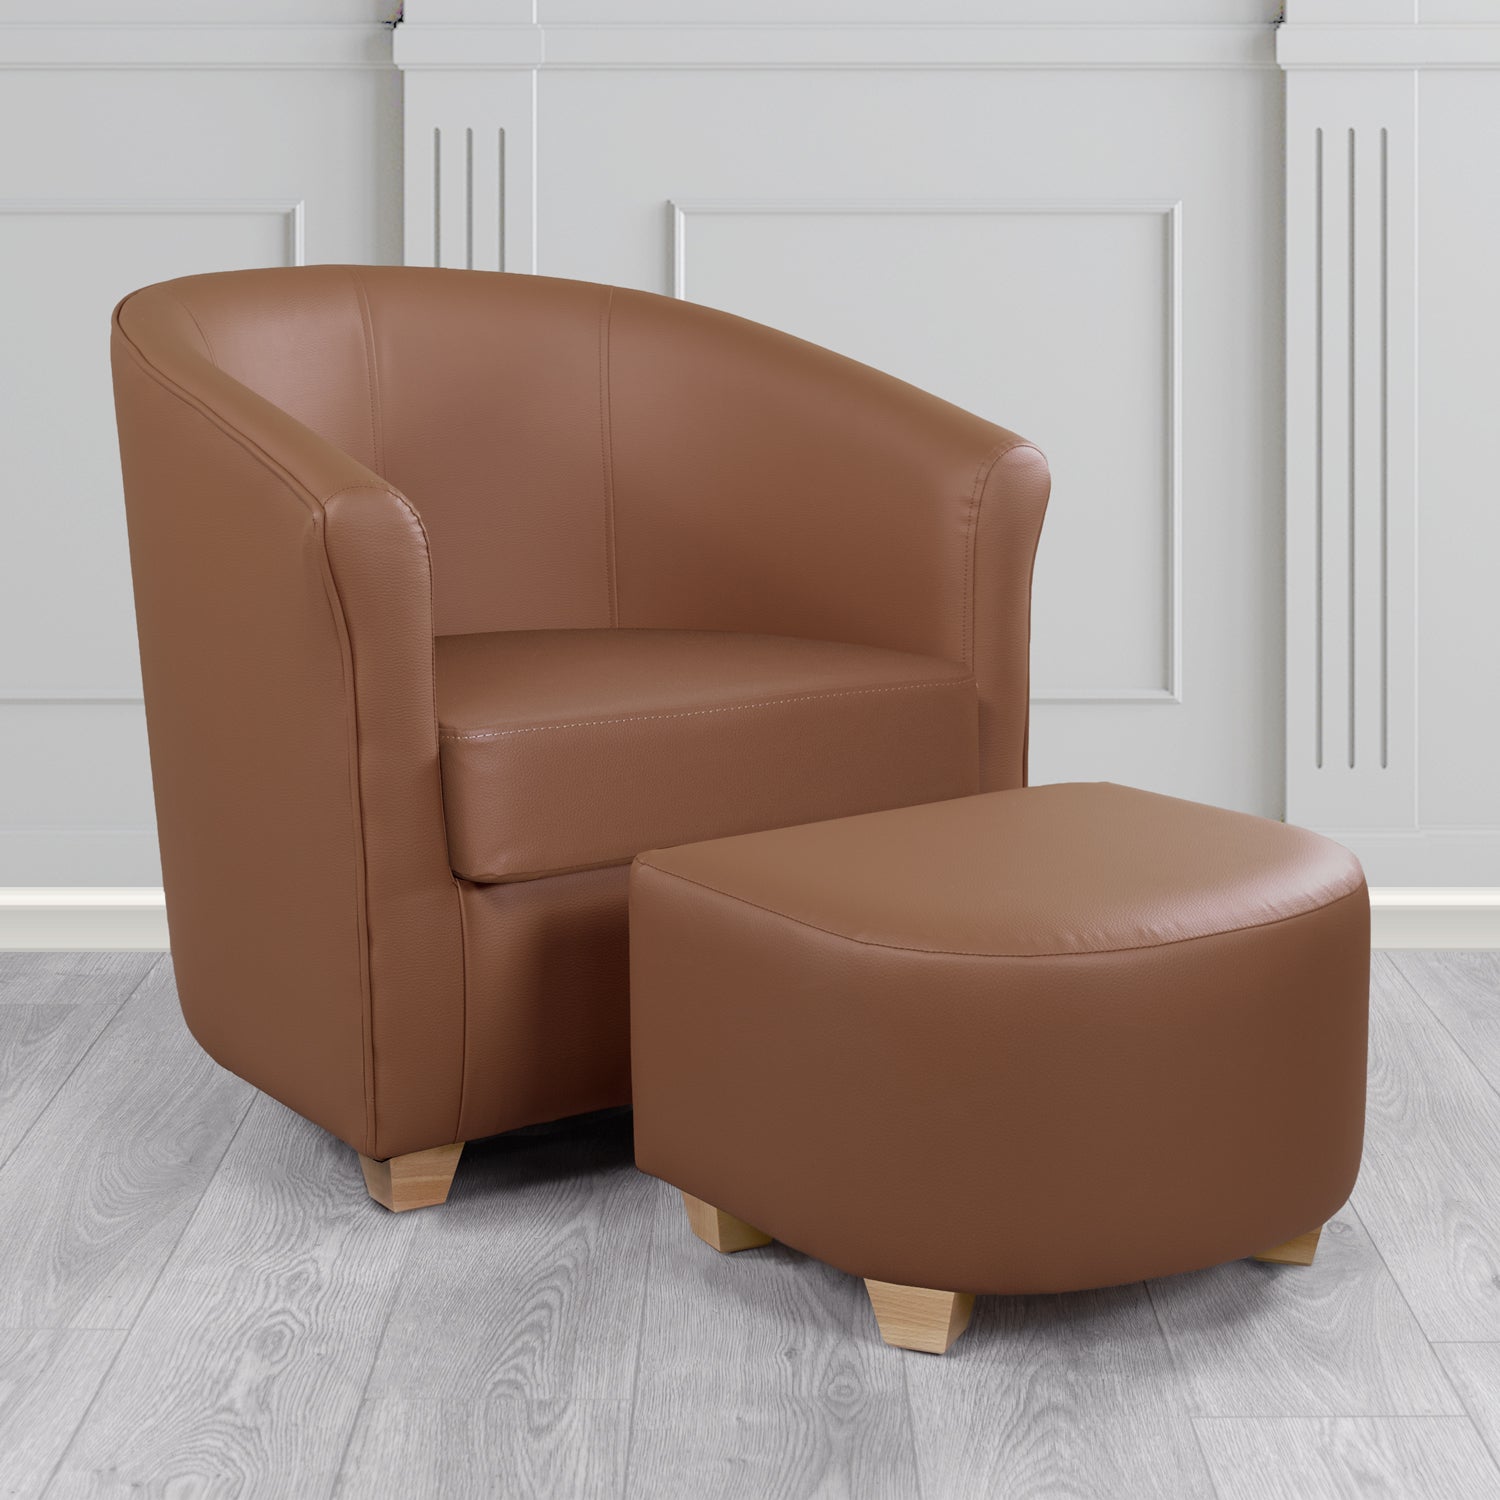 Cannes Tub Chair with Footstool Set in Just Colour Walnut Crib 5 Faux Leather - The Tub Chair Shop